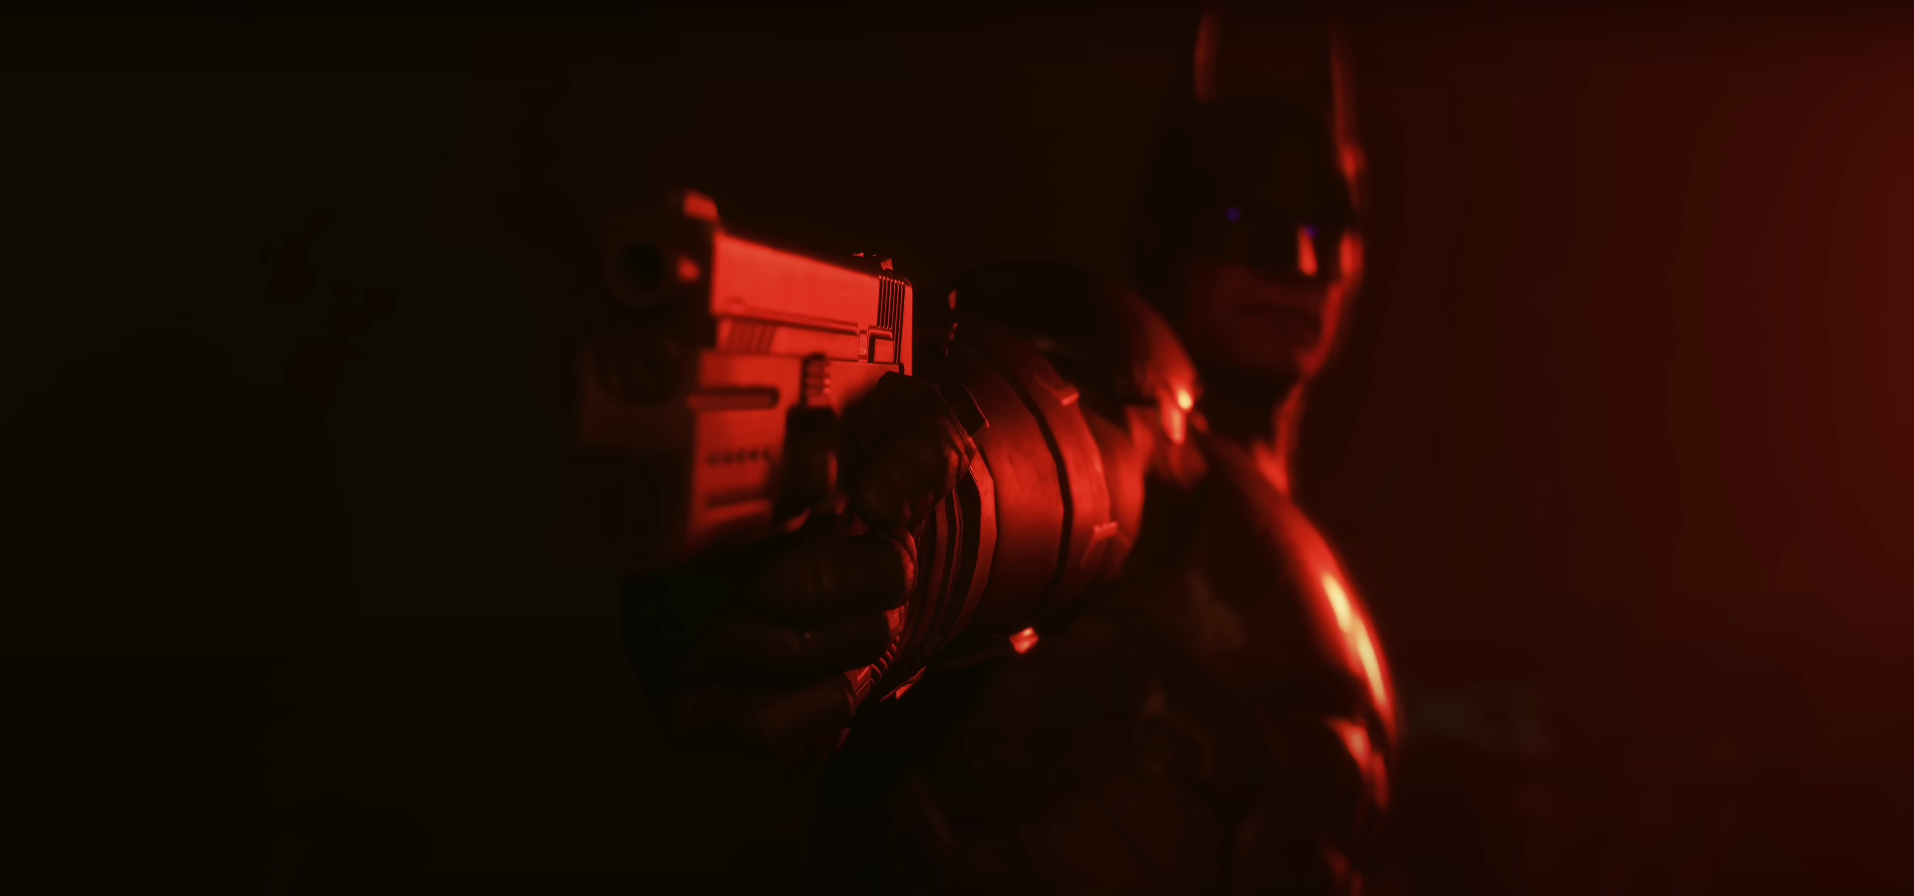 An in game image of Batman holding a gun from Suicide Squad Kill the Justice League